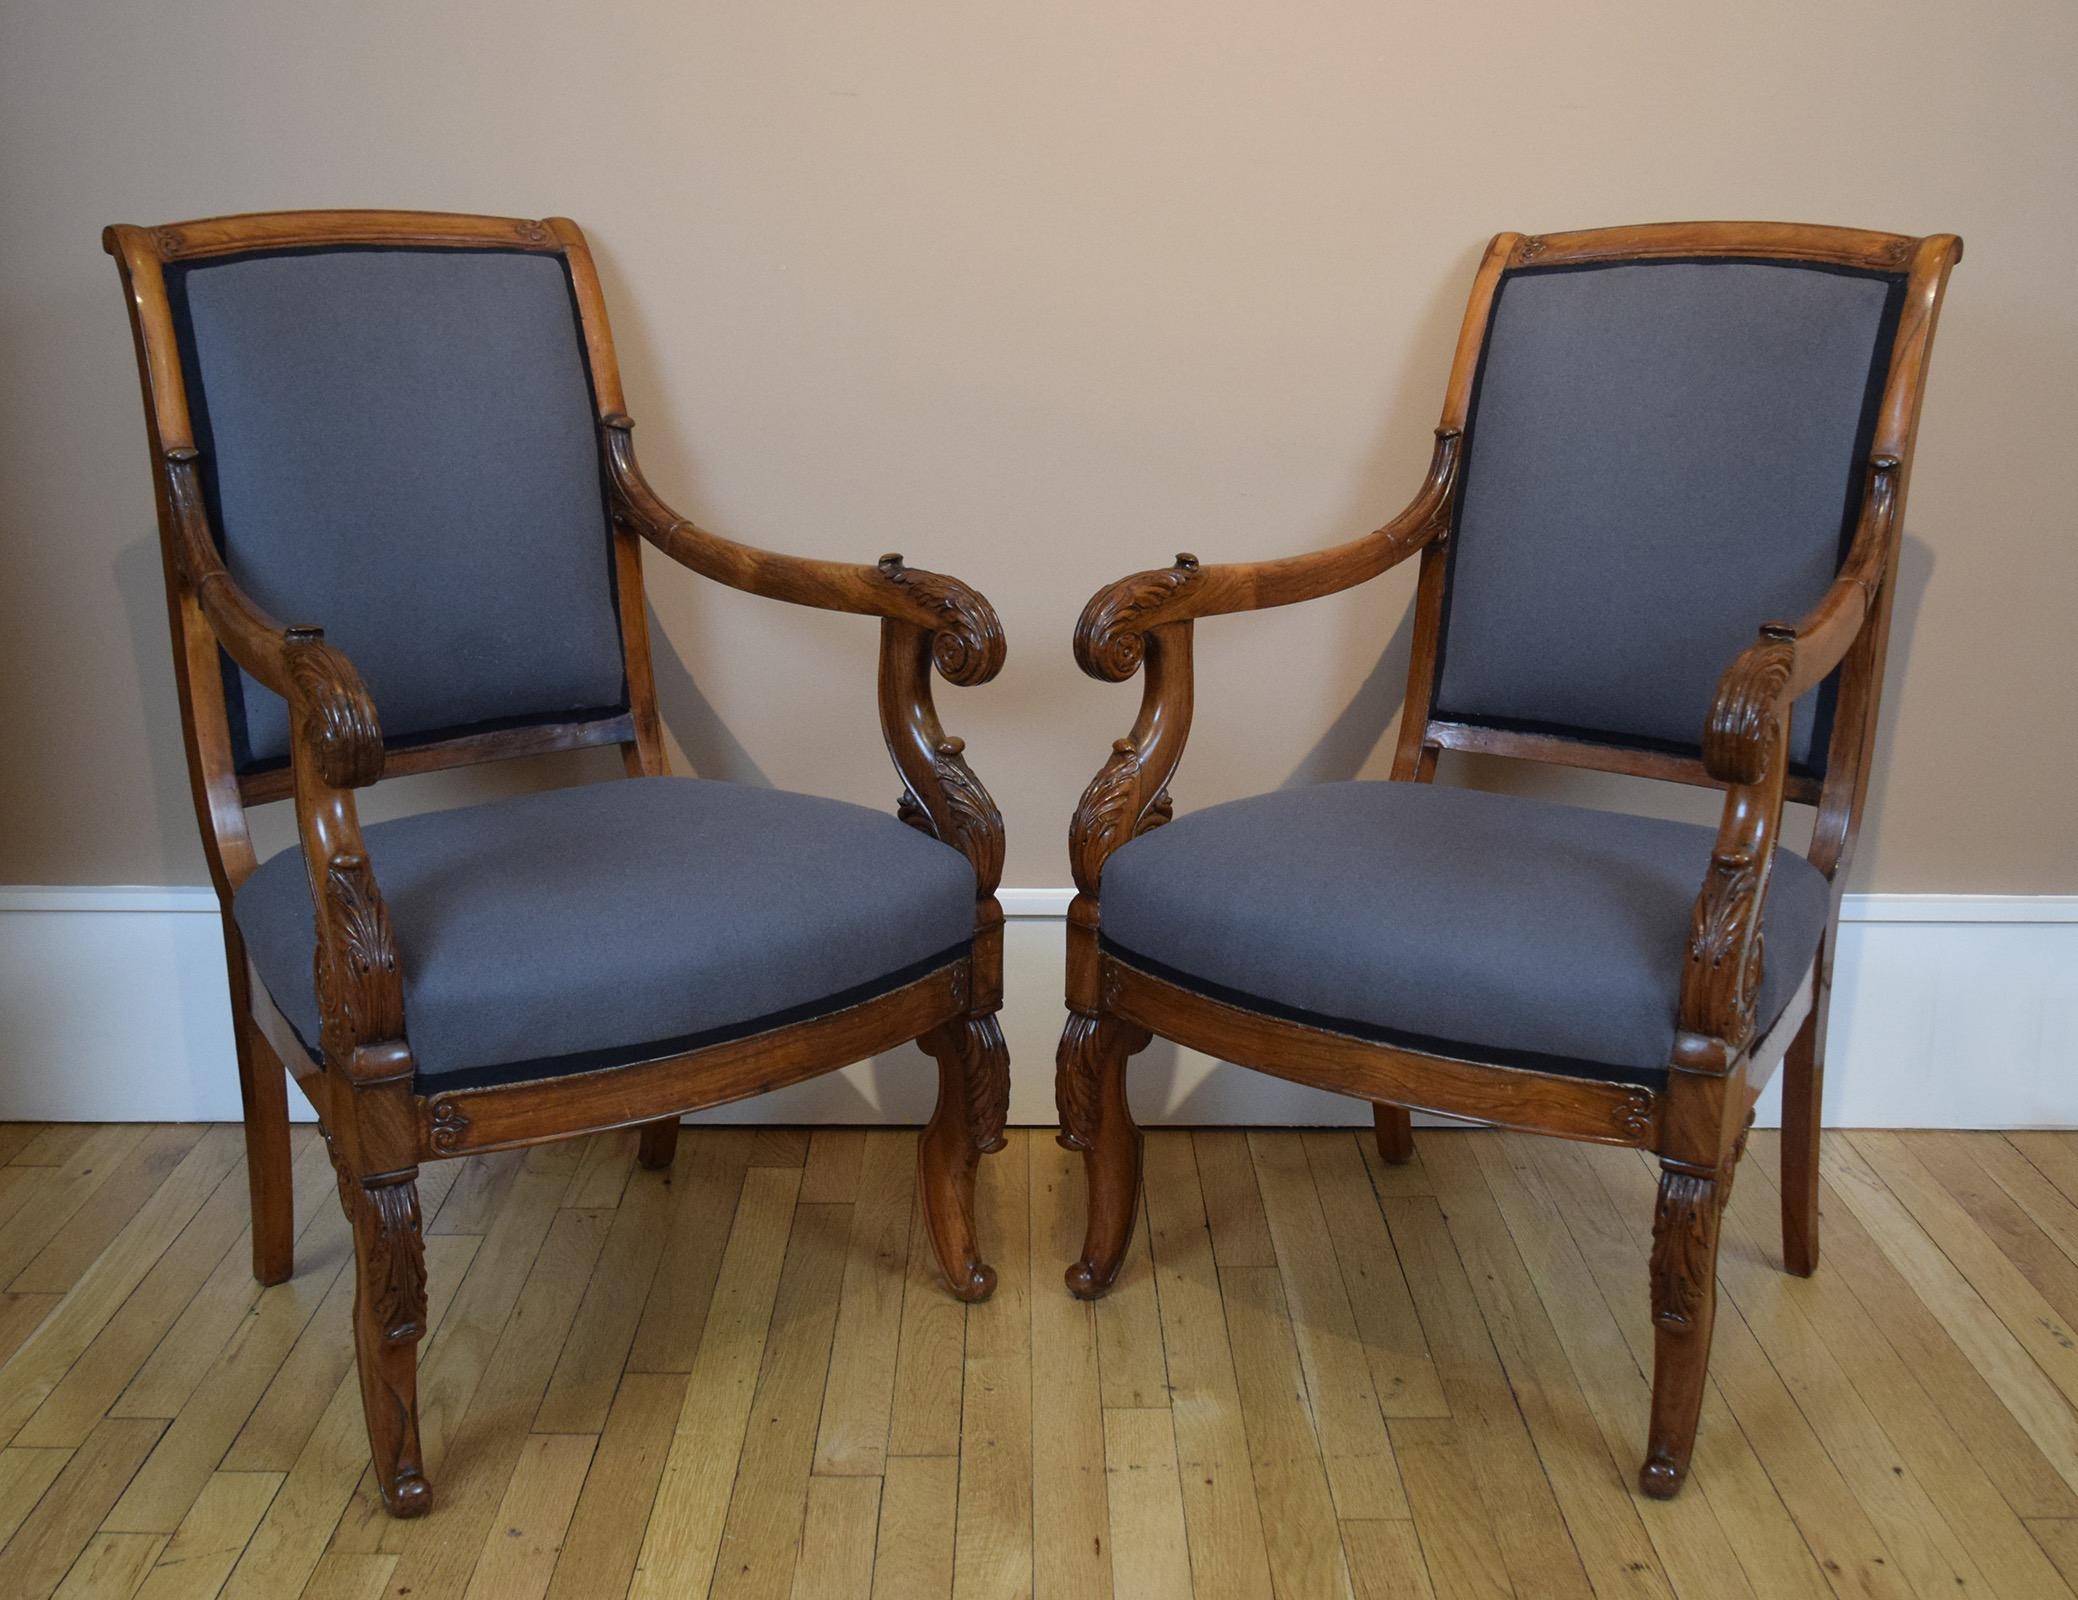 This comfortable, superbly carved pair of Louis-Philippe armchairs is unusual in having been made of rosewood, an exotic timber that was rare in France at the 1840s. It is now upholstered in grey felt with black gimp. 

The chairs come from the